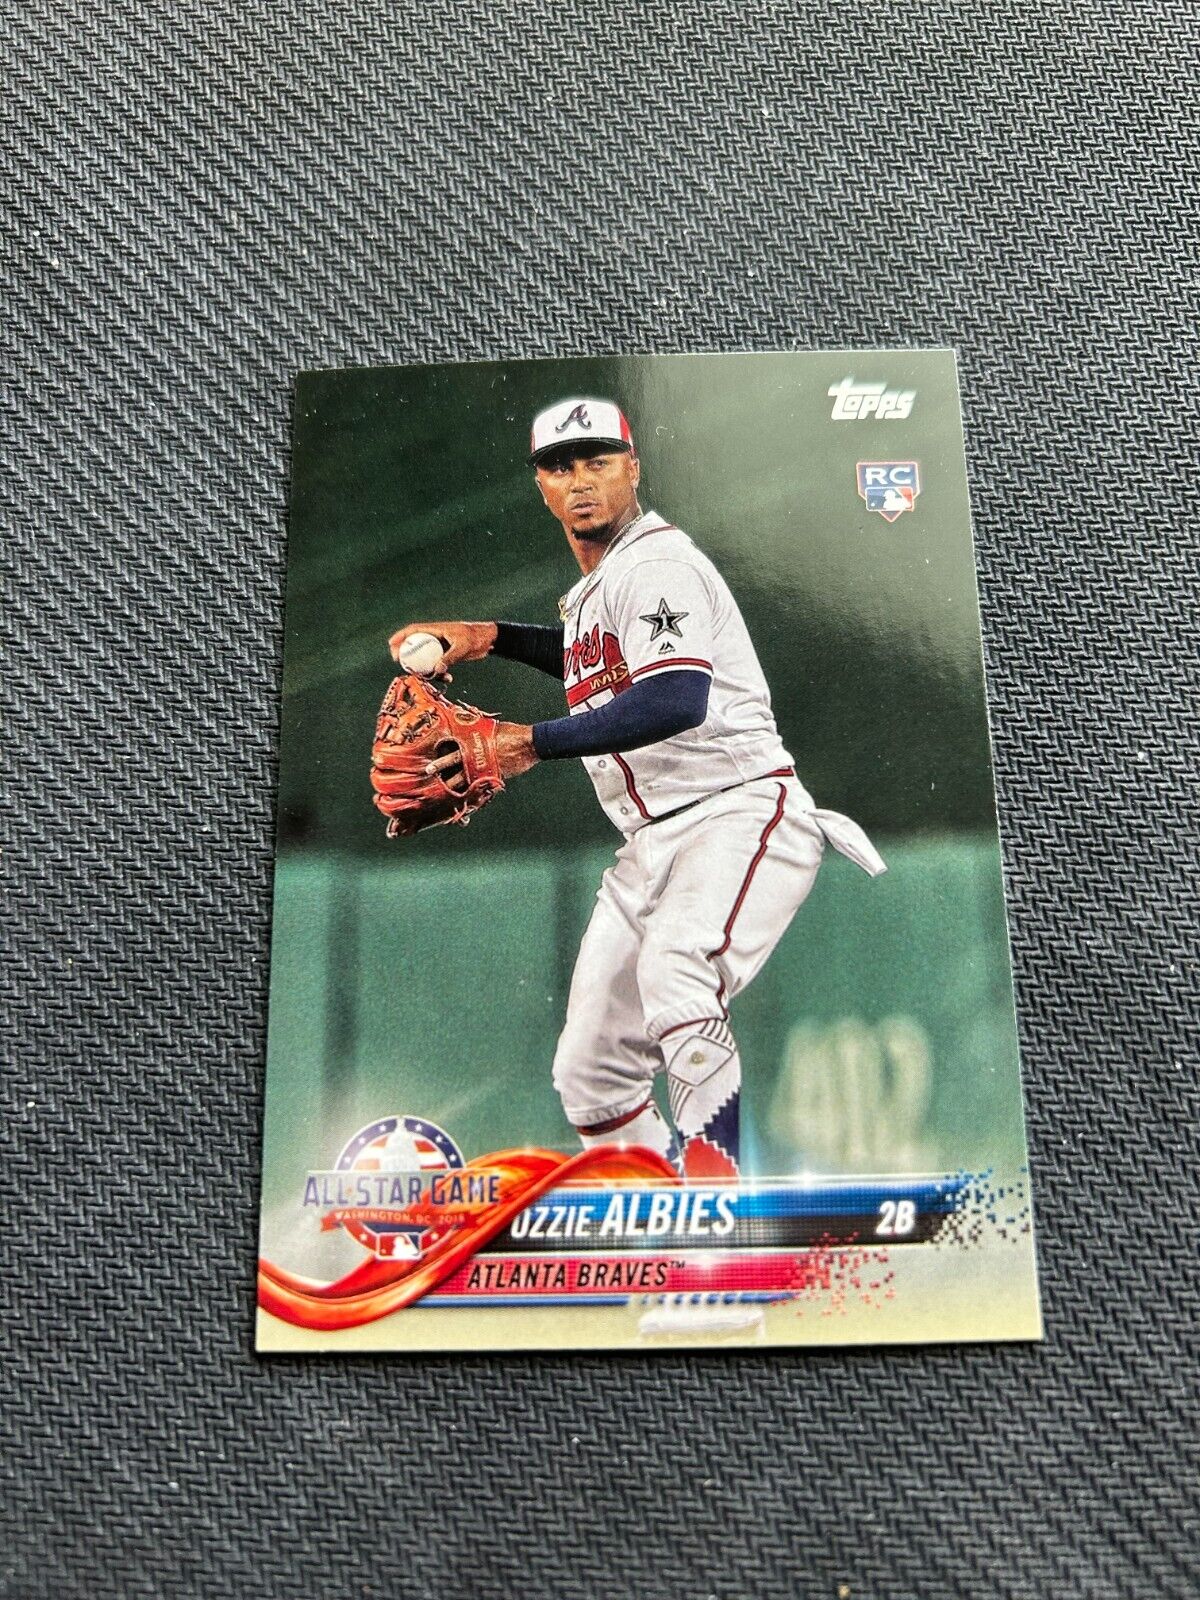 2018 Topps Update Series - All-Star #US162 Ozzie Albies (RC)